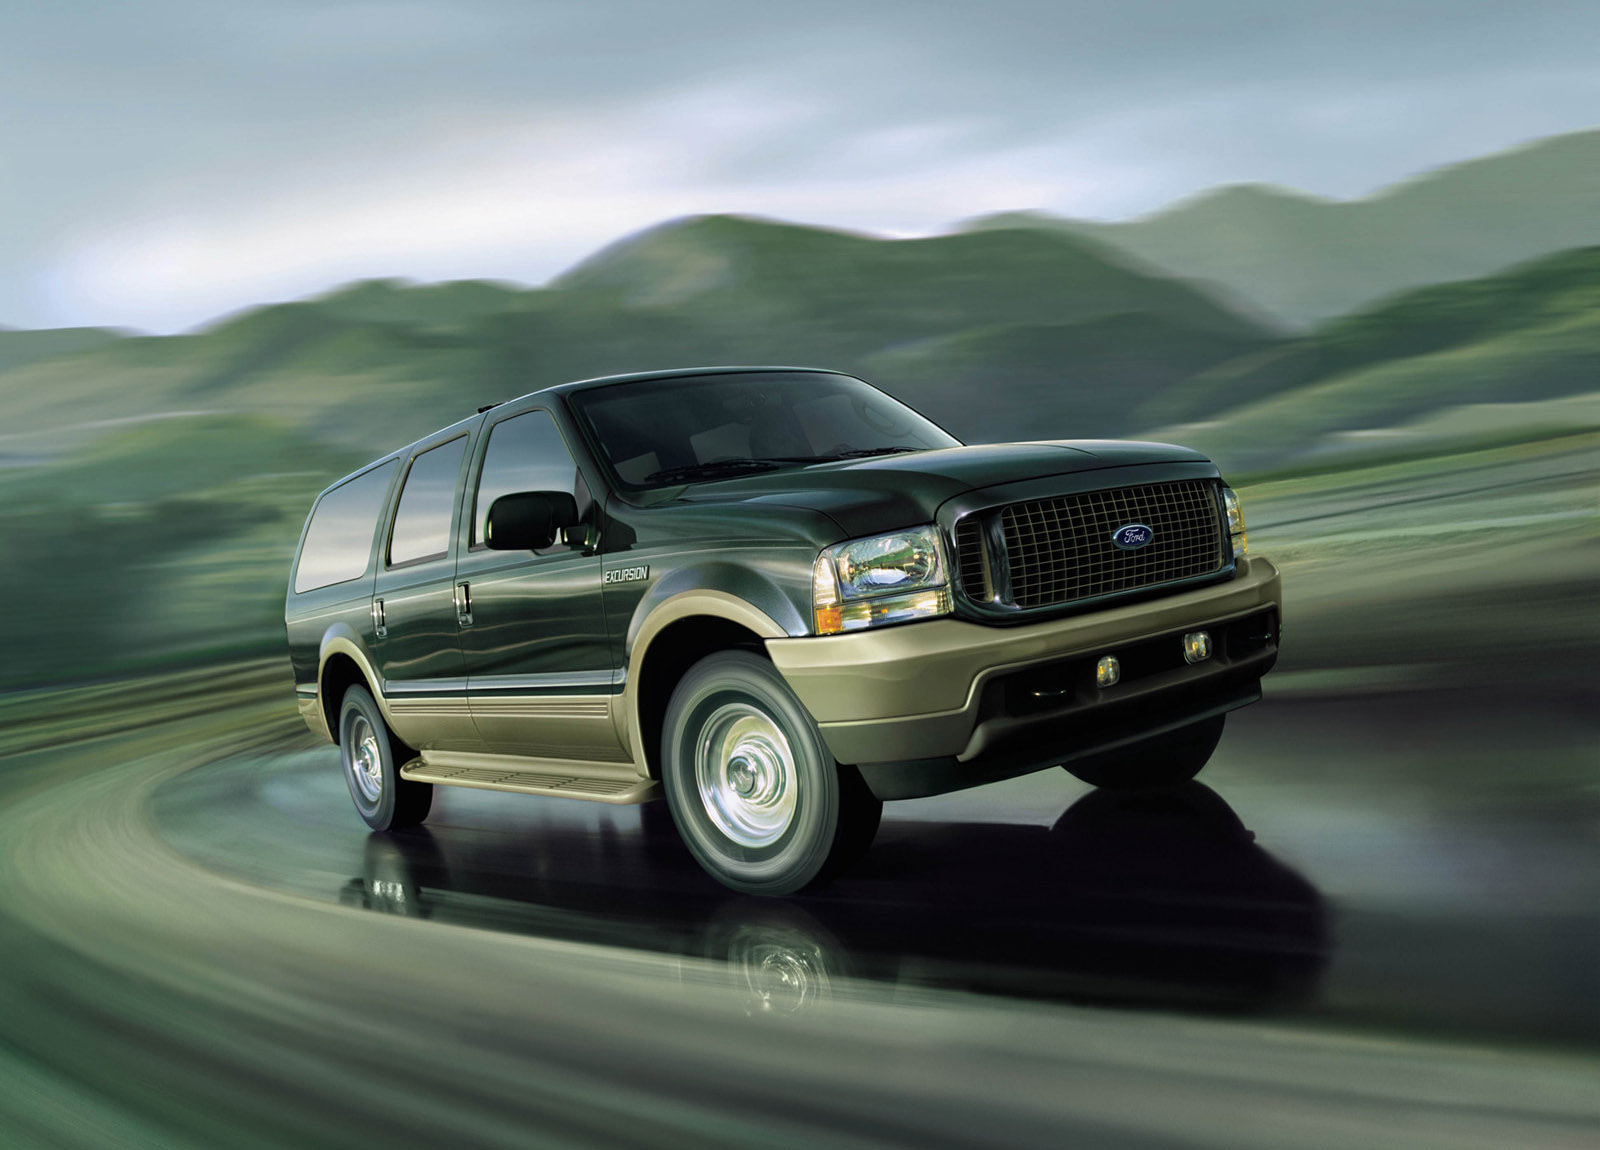 2003 ford excursion 5.4 mpg